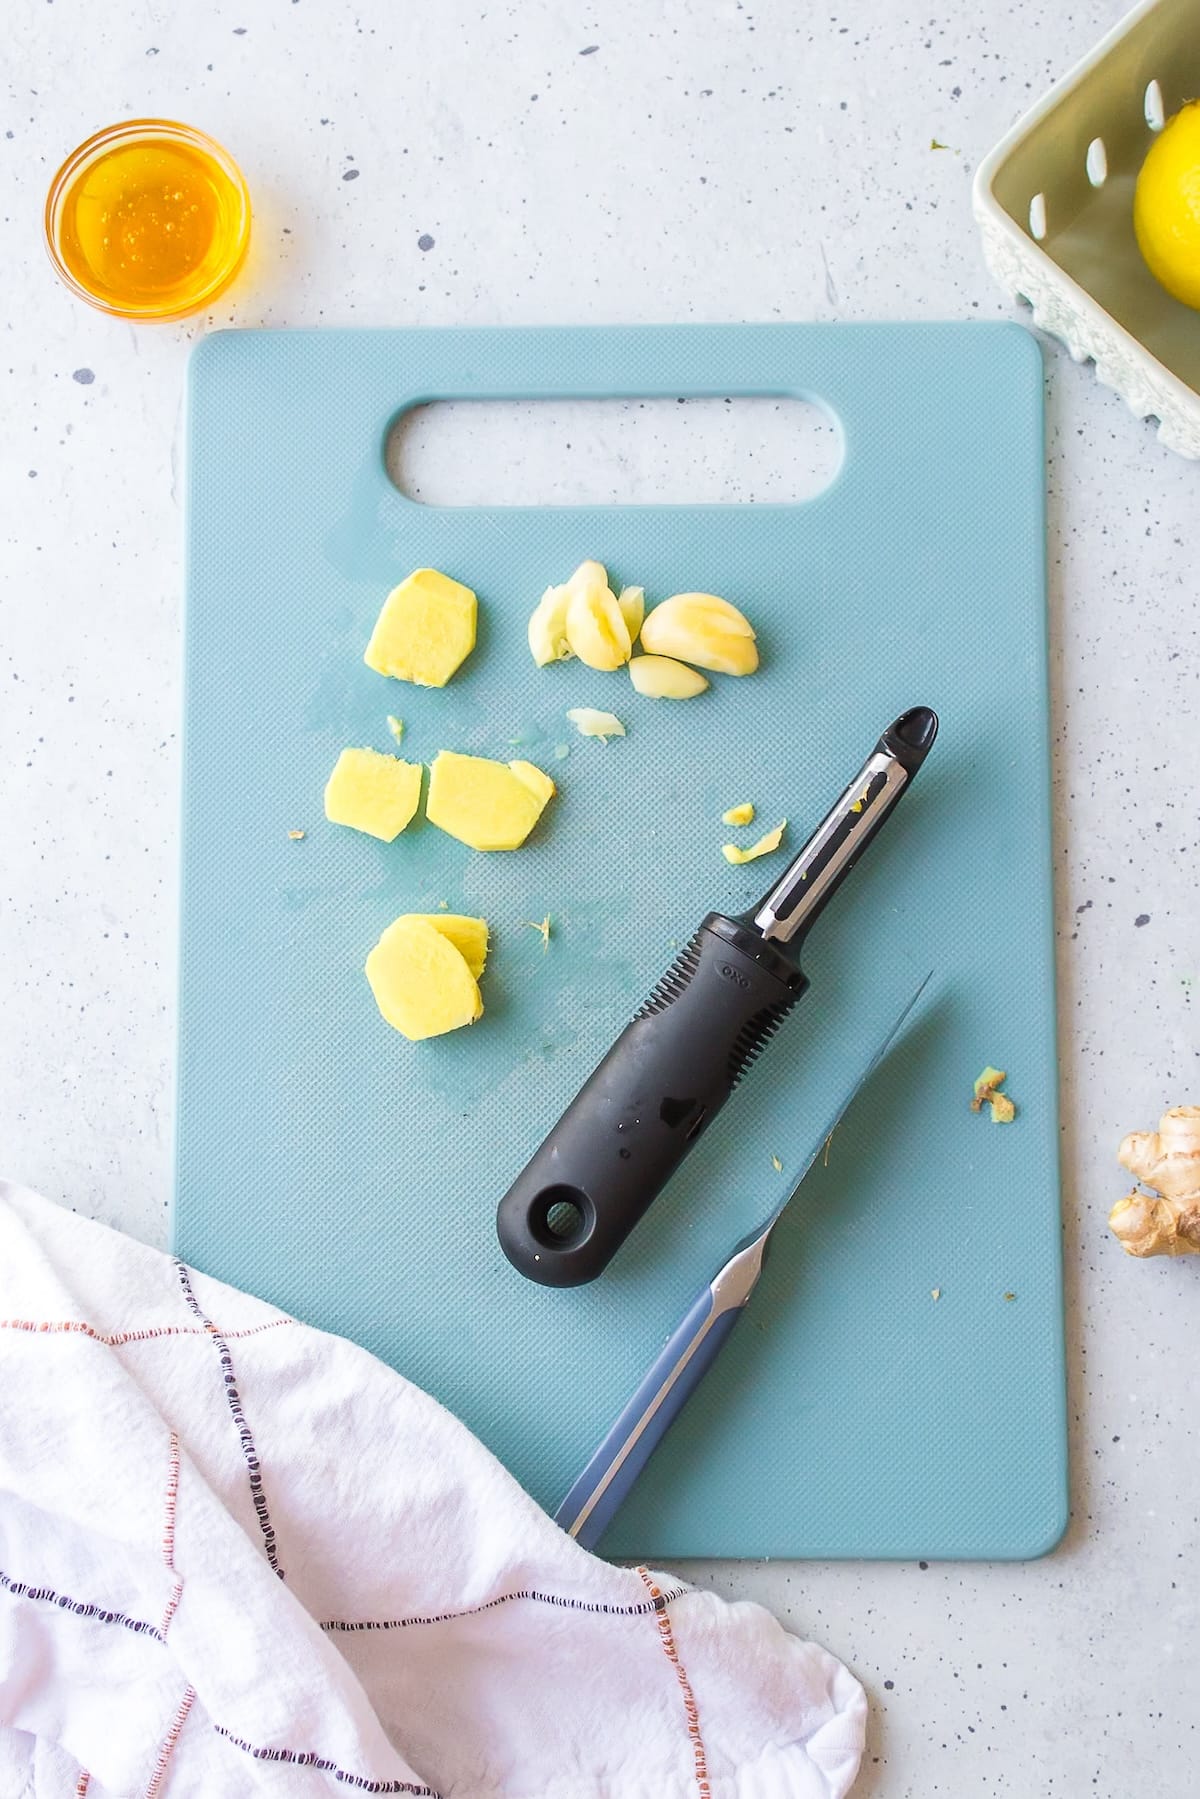 ginger and garlic being peeled and sliced on a cutting board.